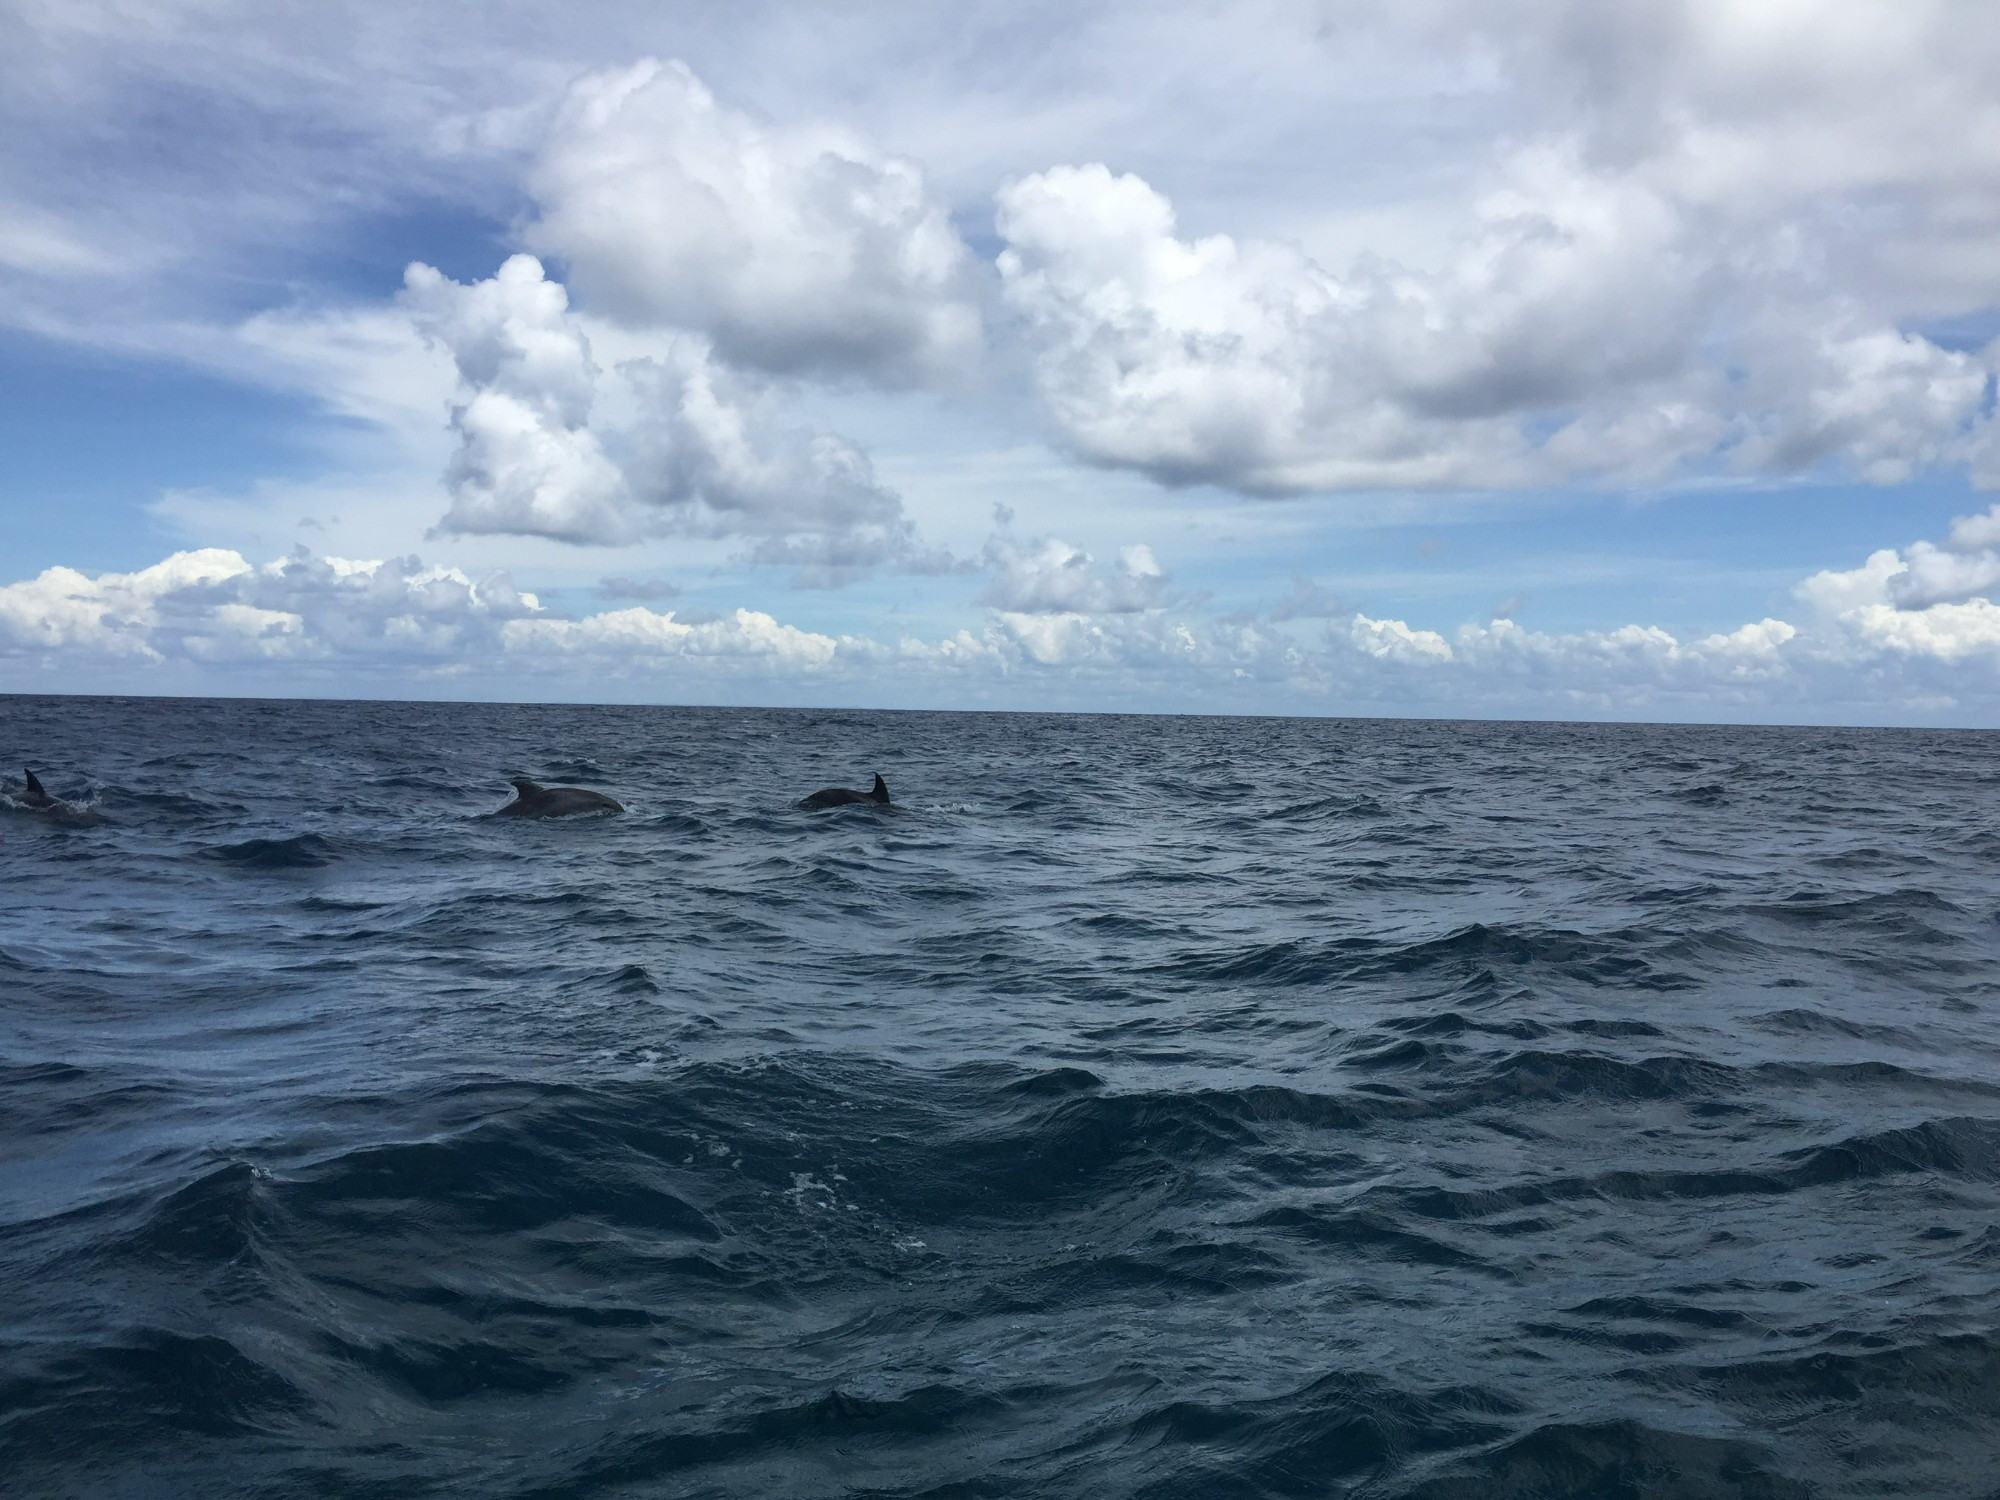 Dolphins in the Indian Ocean 